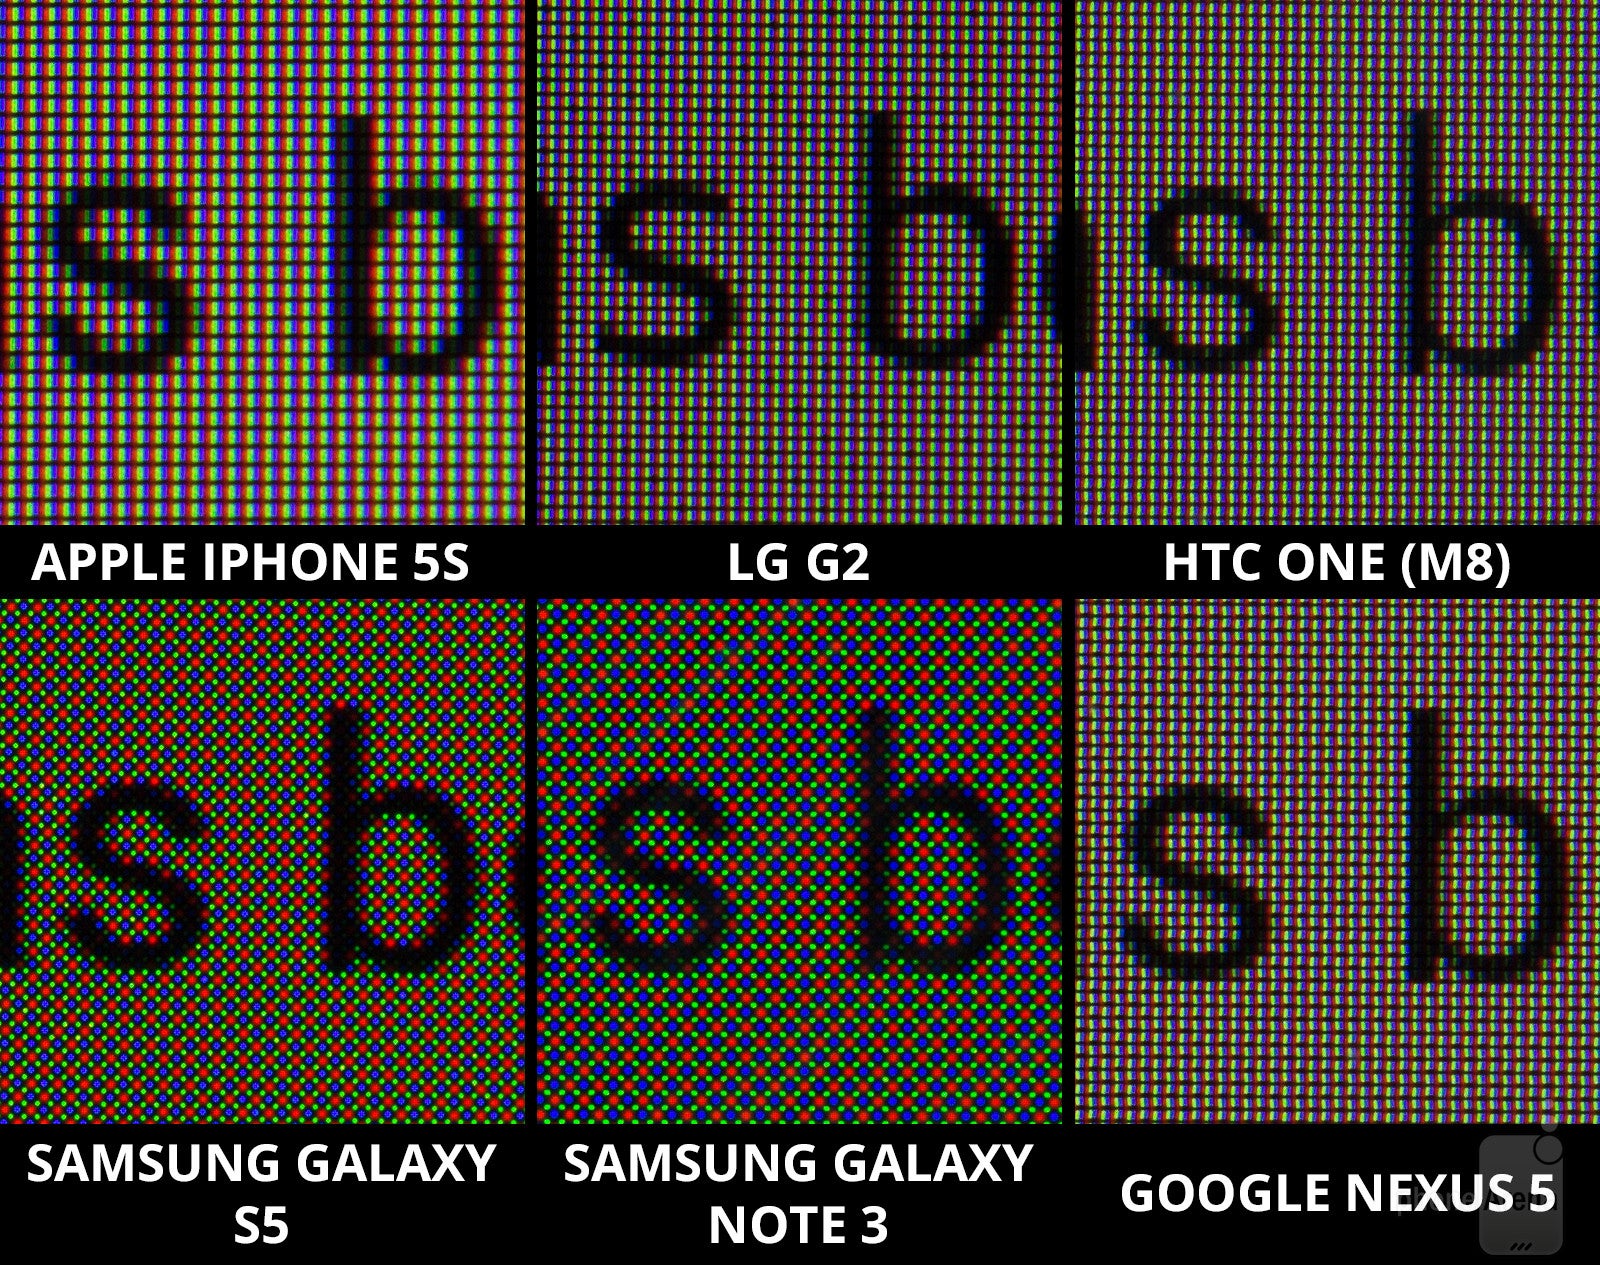 The Galaxy S5 and Note 3 feature diamond PenTile pixel arrangements, but this doesn't really detract from their clarity - Screen comparison: Galaxy S5 vs iPhone 5s vs One (M8) vs Note 3 vs Nexus 5 vs G2